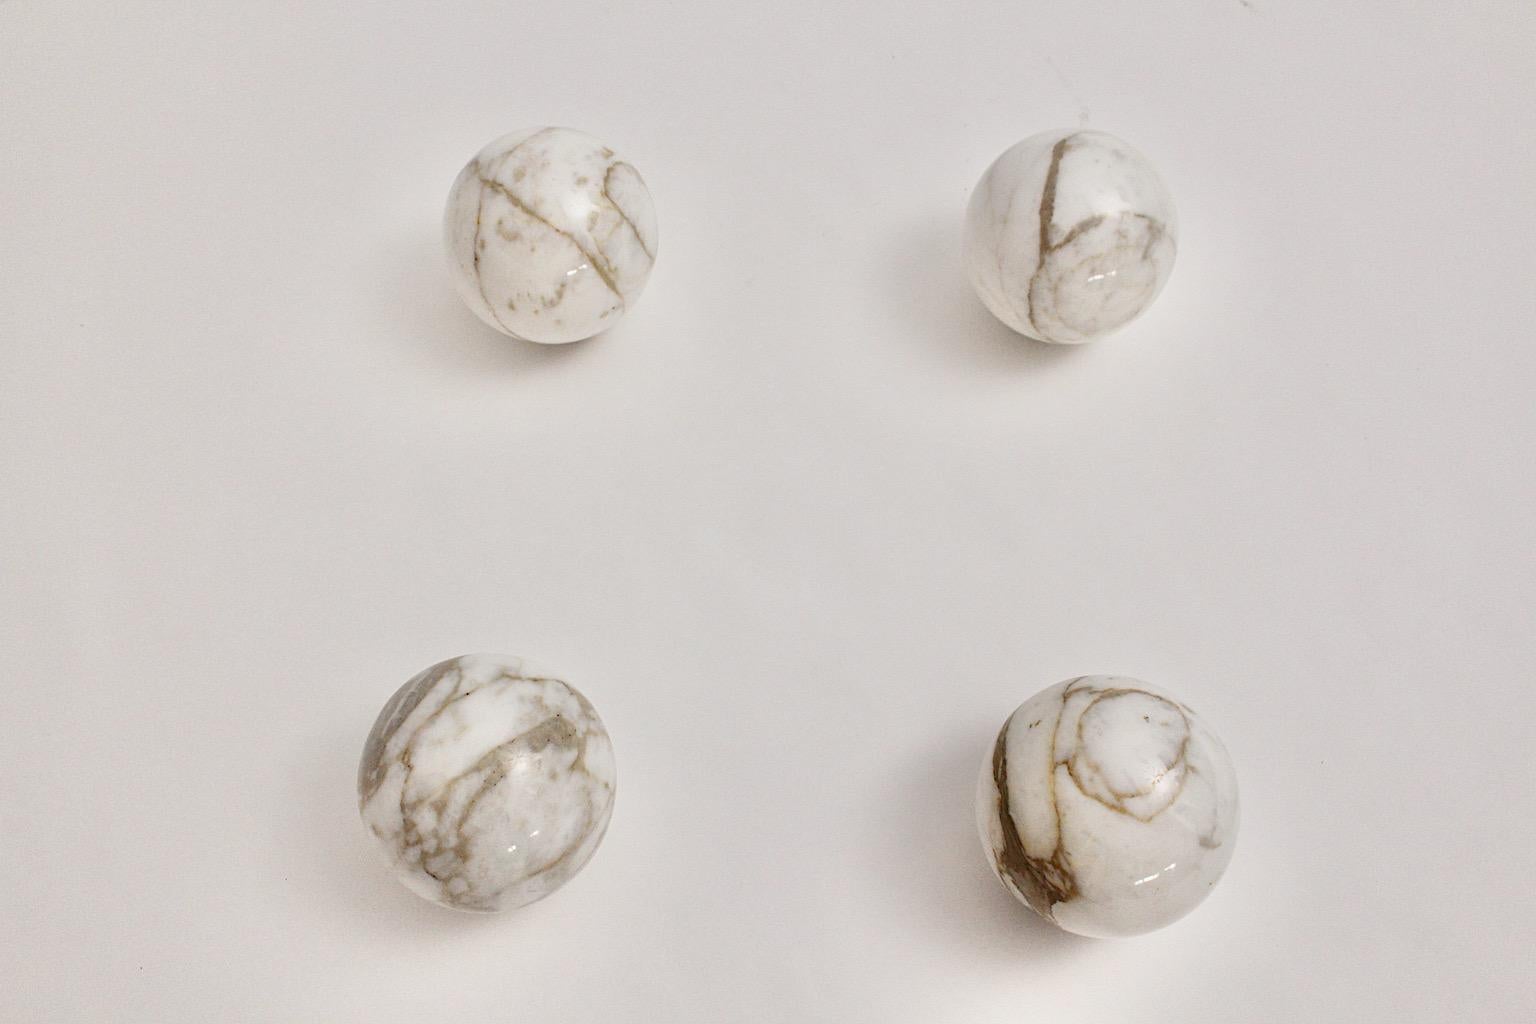 Italian Modern Vintage Four White Brown Marble Bullets, Italy, 1970s For Sale 2